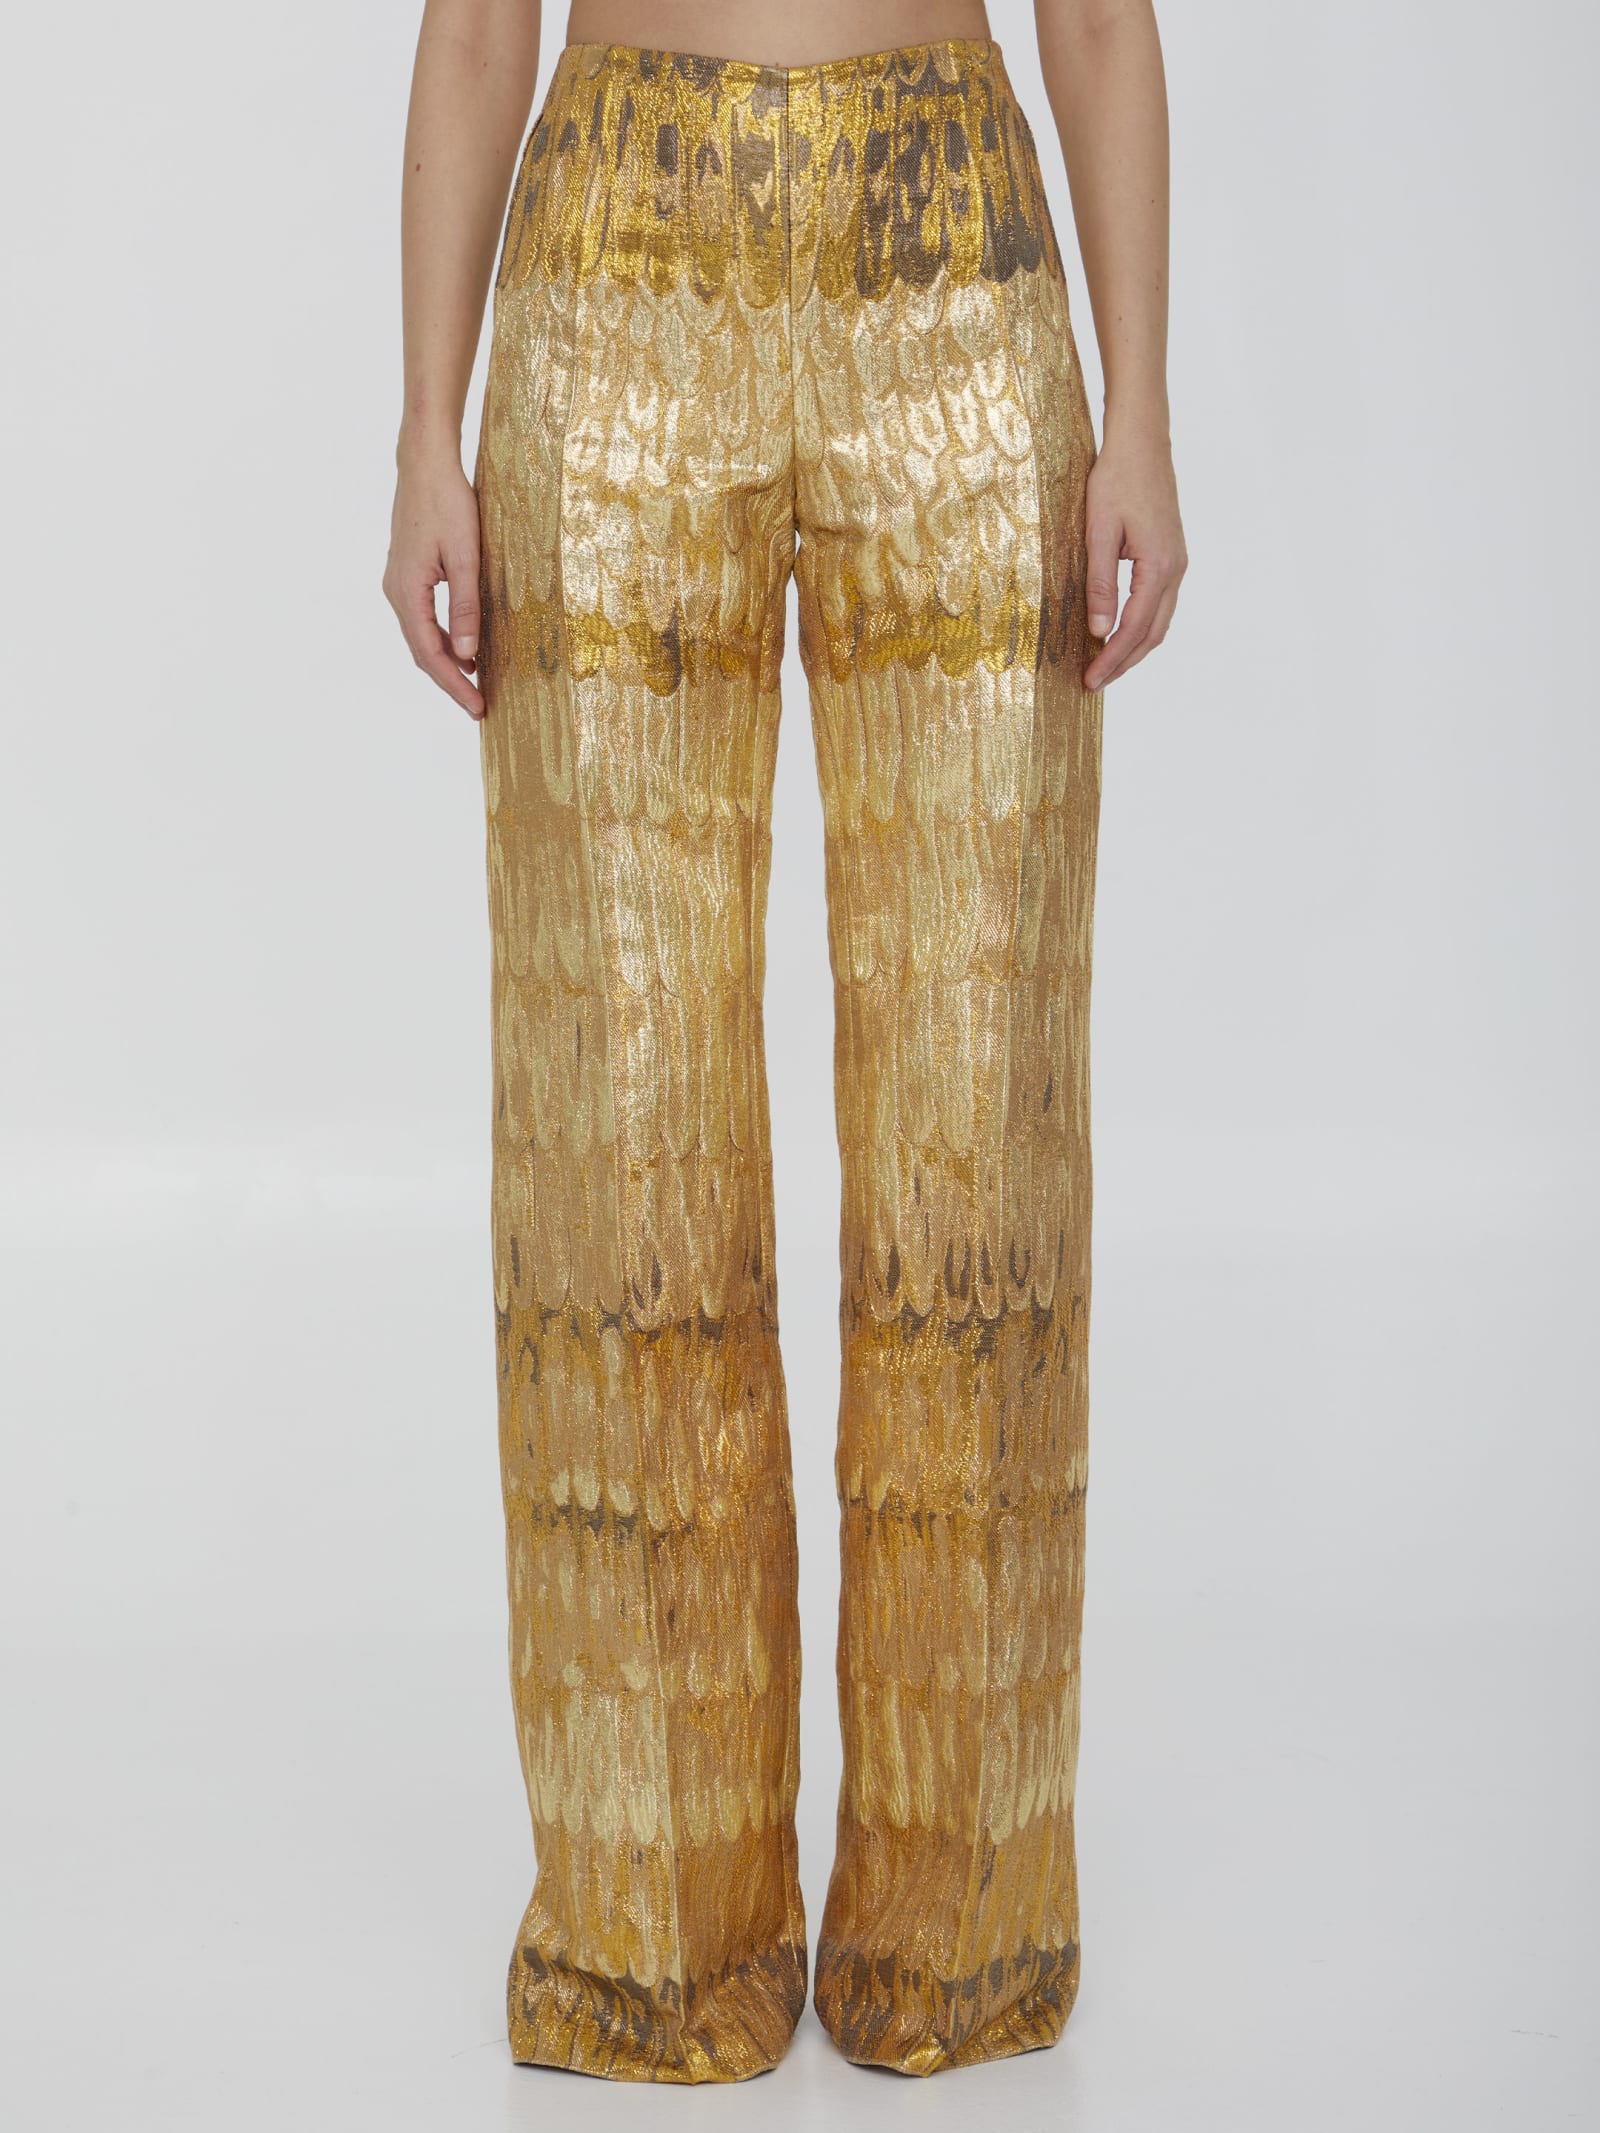 VALENTINO VALENTINO GOLDEN WINGS TROUSERS